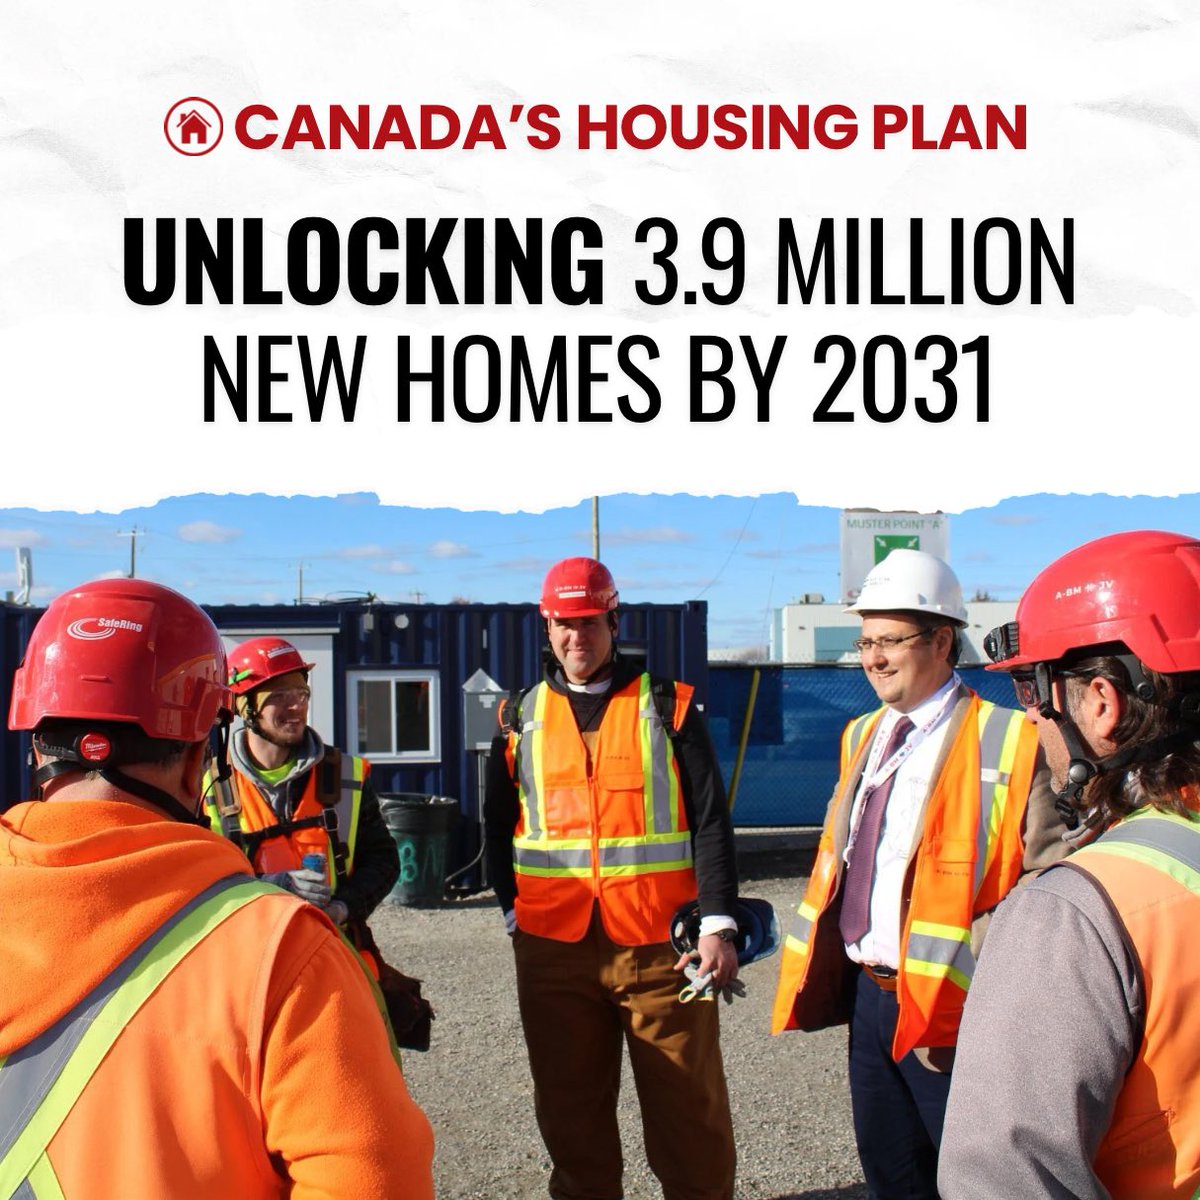 BREAKING: Our housing plan will unlock 3.9 million new homes across Canada by 2031 - focussing on 3 areas: 🧱 Building more homes 🏠 Making it easier to own or rent 👨‍👩‍👧‍👦 Helping those who can’t afford a home Read our plan to solve the housing crisis: infrastructure.gc.ca/housing-logeme…